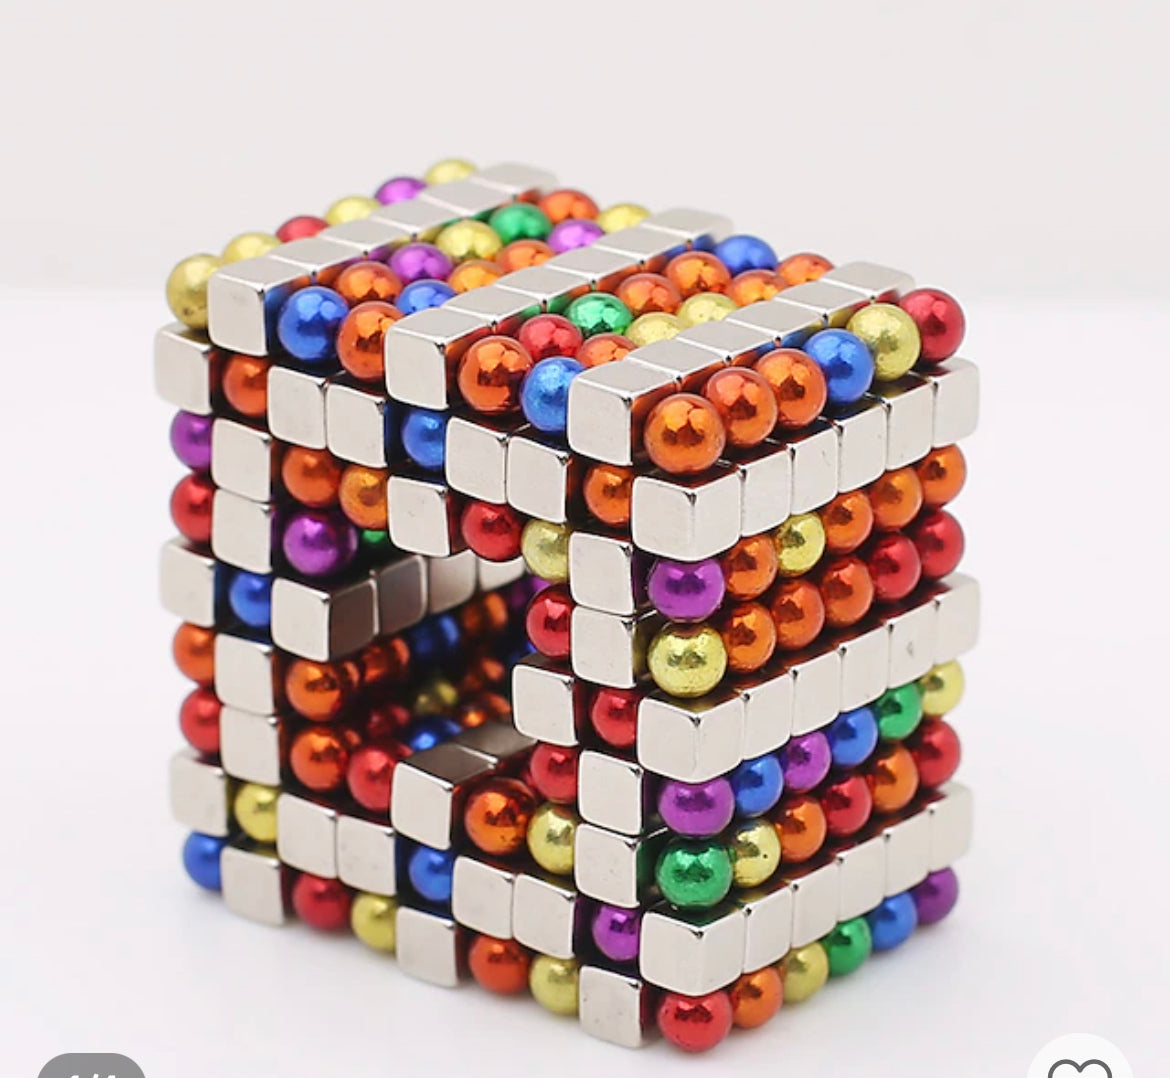 2 in 1 Magnetic ball and cubes - colorfull ball and magnetic cubes - DIy puzzle game for kids